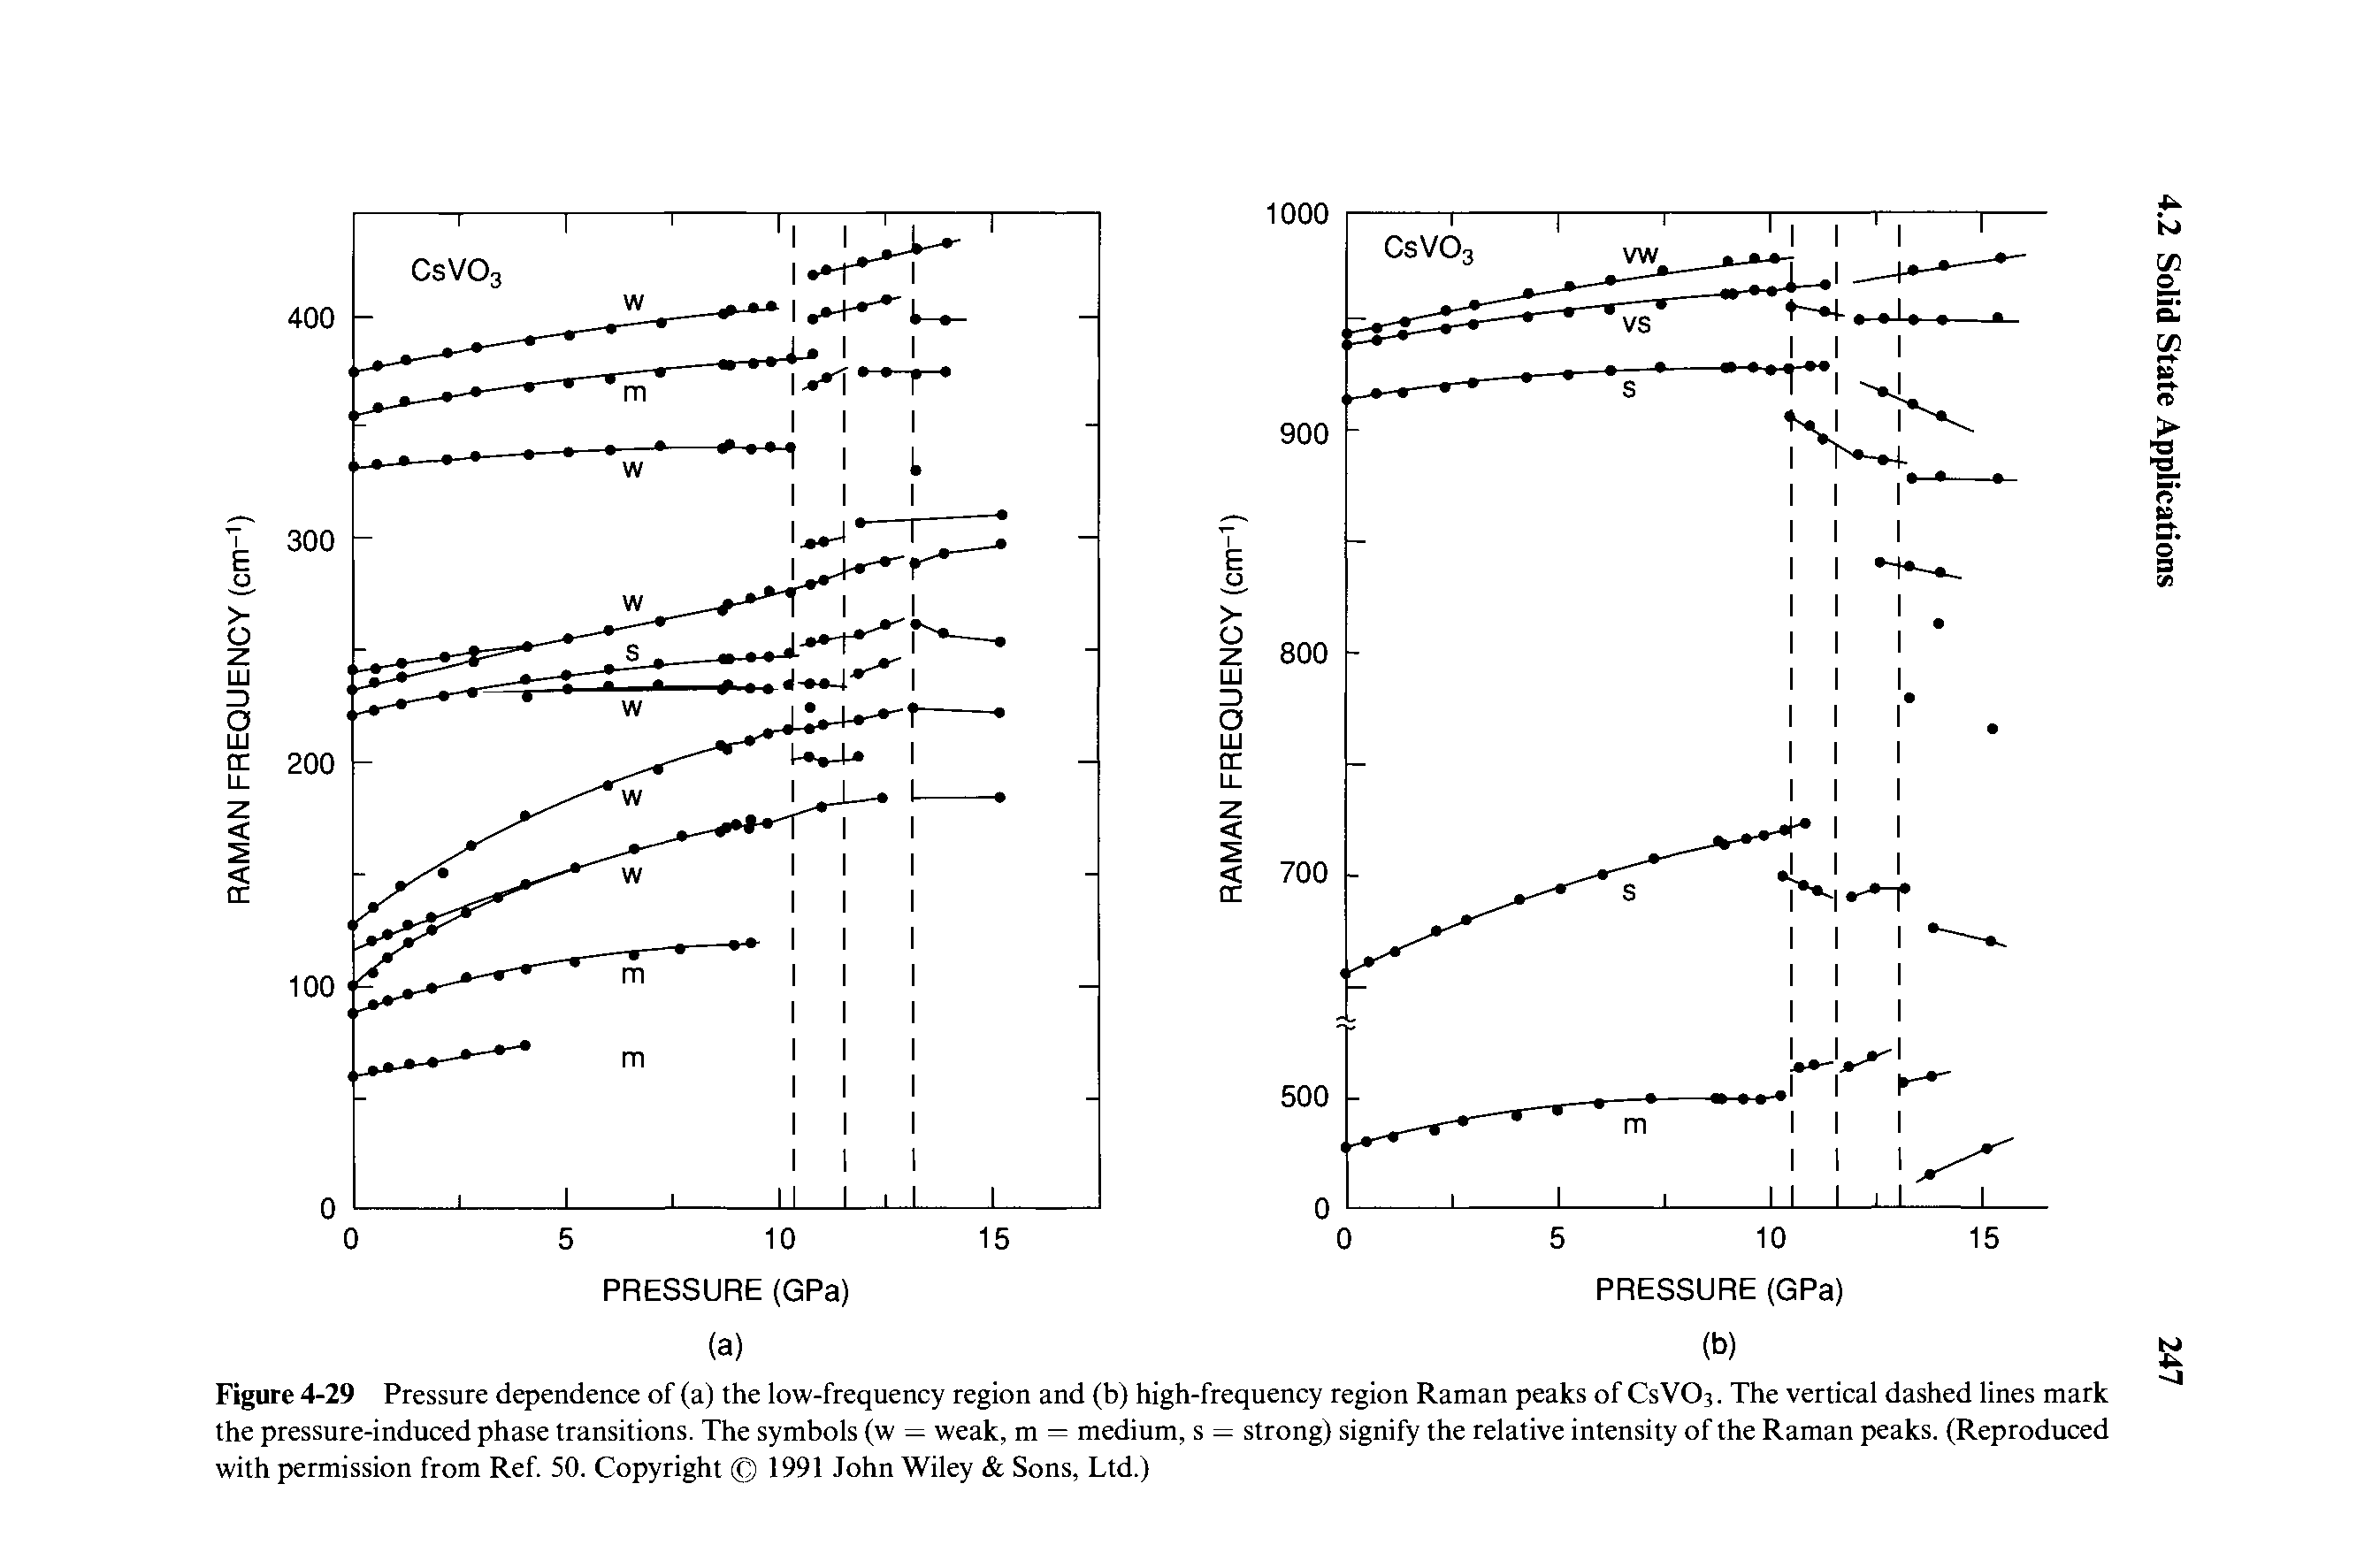 Figure 4-29 Pressure dependence of (a) the low-frequency region and (b) high-frequency region Raman peaks of CsVC The vertical dashed lines mark the pressure-induced phase transitions. The symbols (w = weak, m = medium, s = strong) signify the relative intensity of the Raman peaks. (Reproduced with permission from Ref. 50. Copyright 1991 John Wiley Sons, Ltd.)...